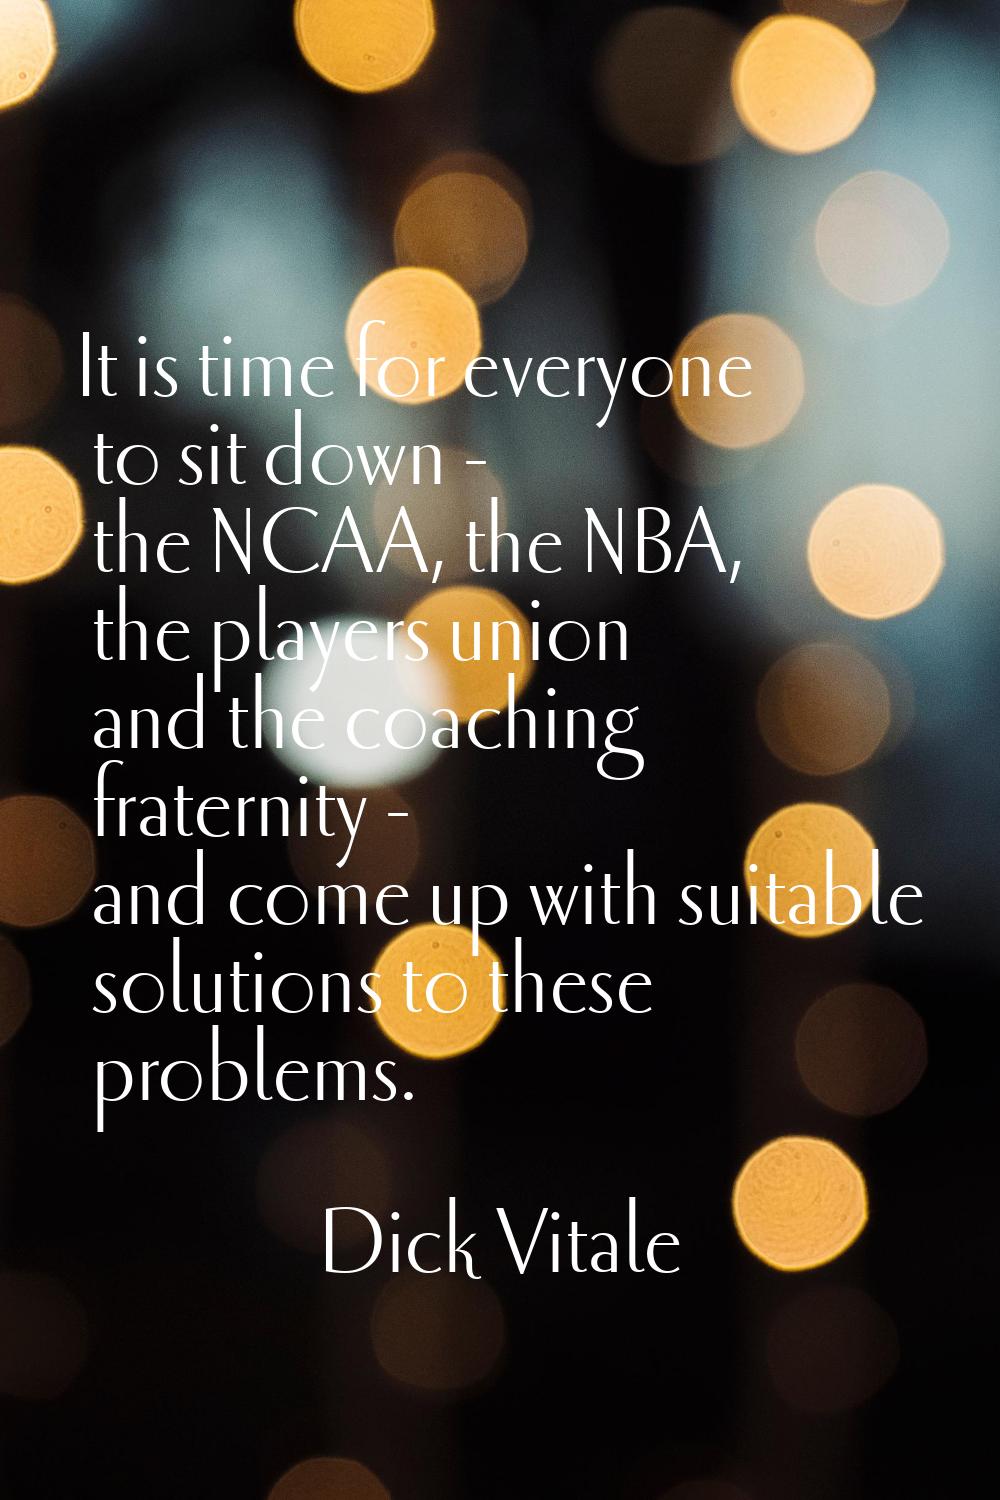 It is time for everyone to sit down - the NCAA, the NBA, the players union and the coaching fratern